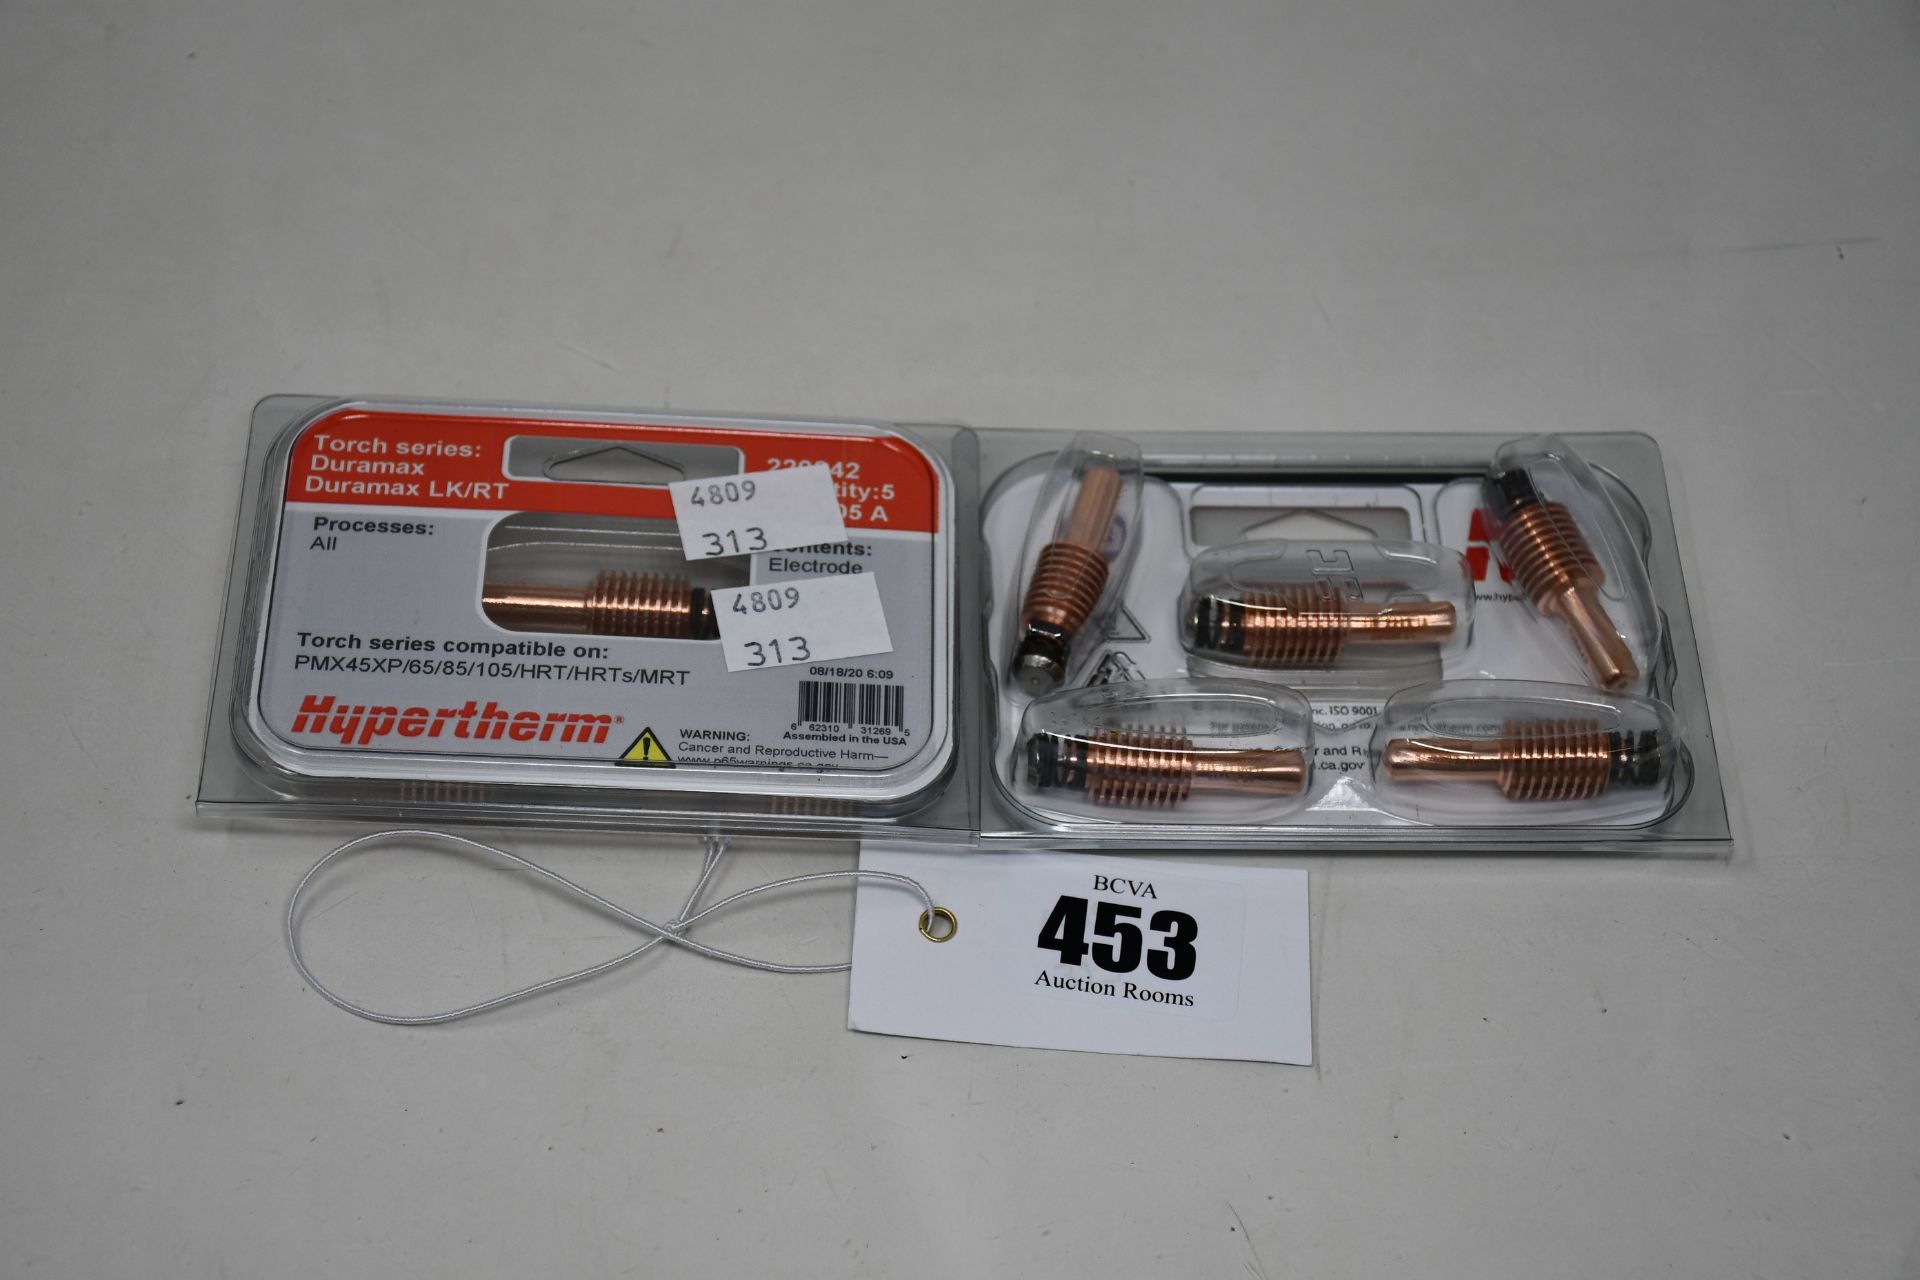 Six packs of five as new Hypertherm 220842 Electrodes (Torch series compatible on: PMX45XP/65/85/